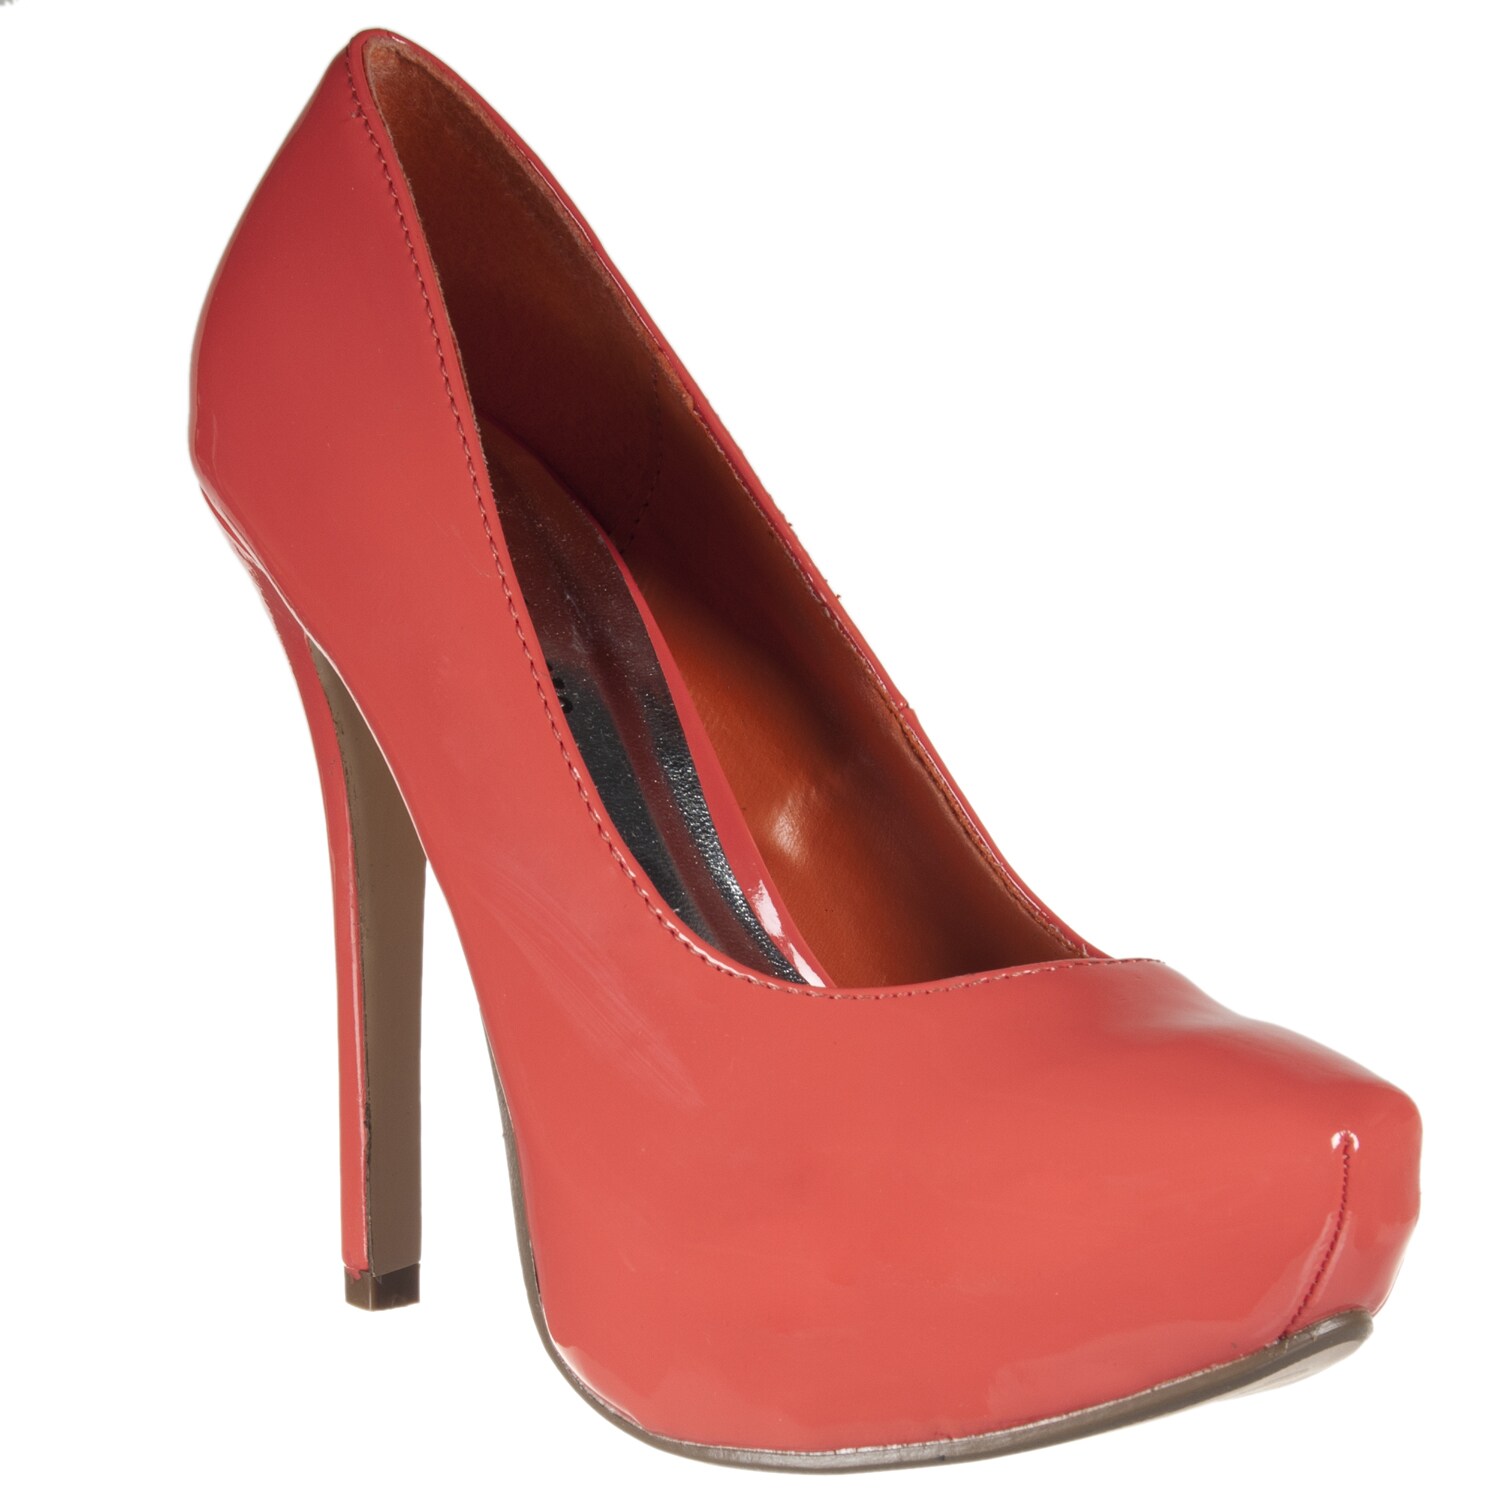 Riverberry Women's 'XOXO' Coral Patent Pumps - Overstock™ Shopping ...